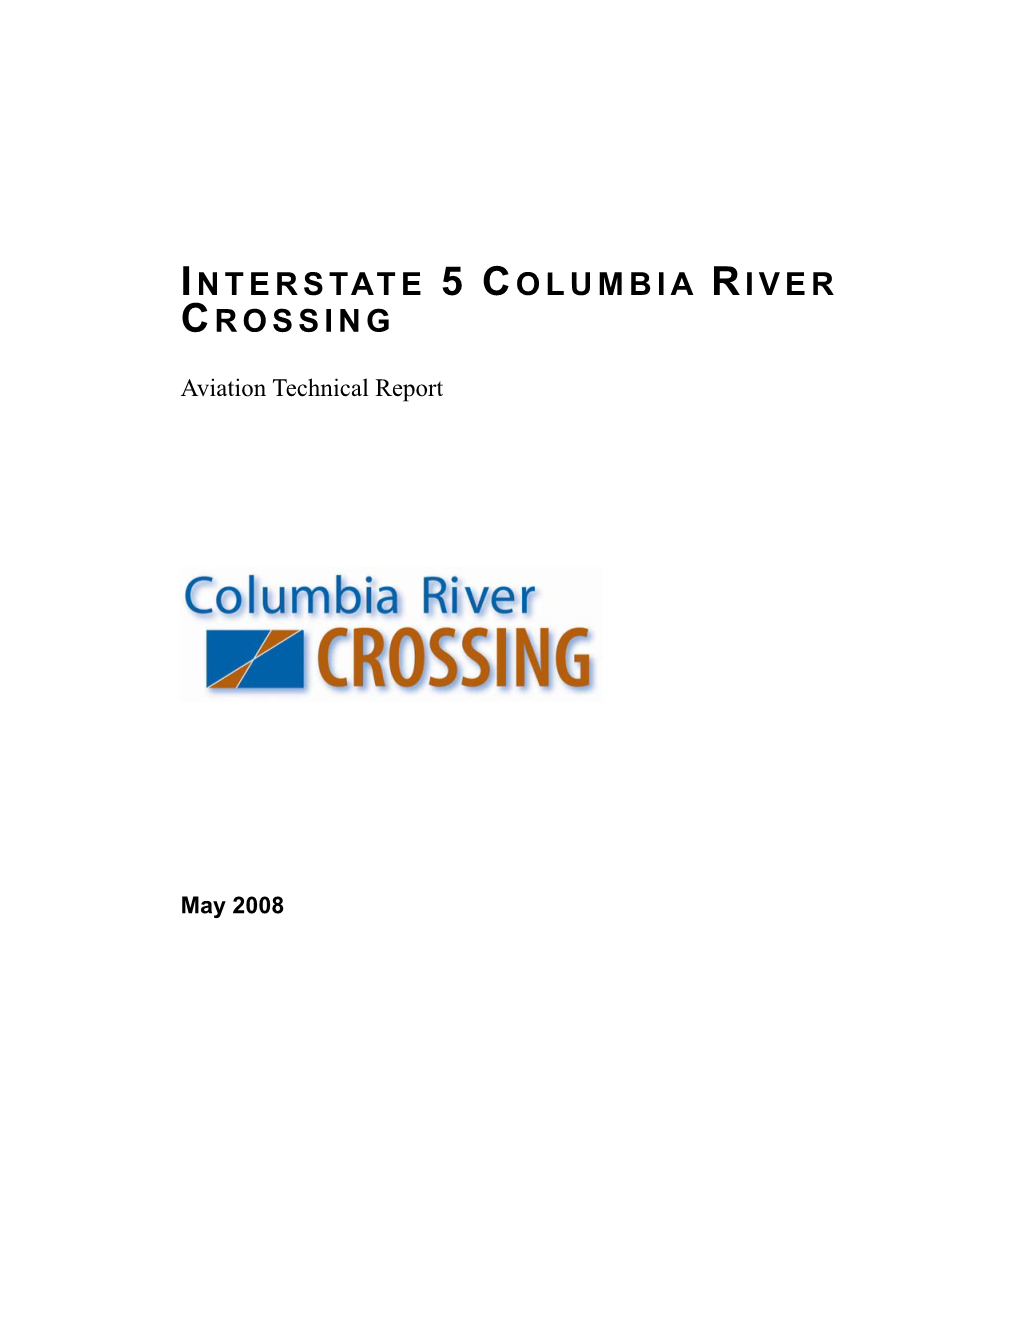 Interstate 5 Columbia River Crossing Aviation Technical Report Cover Sheet Interstate 5 Columbia River Crossing Aviation Technical Report